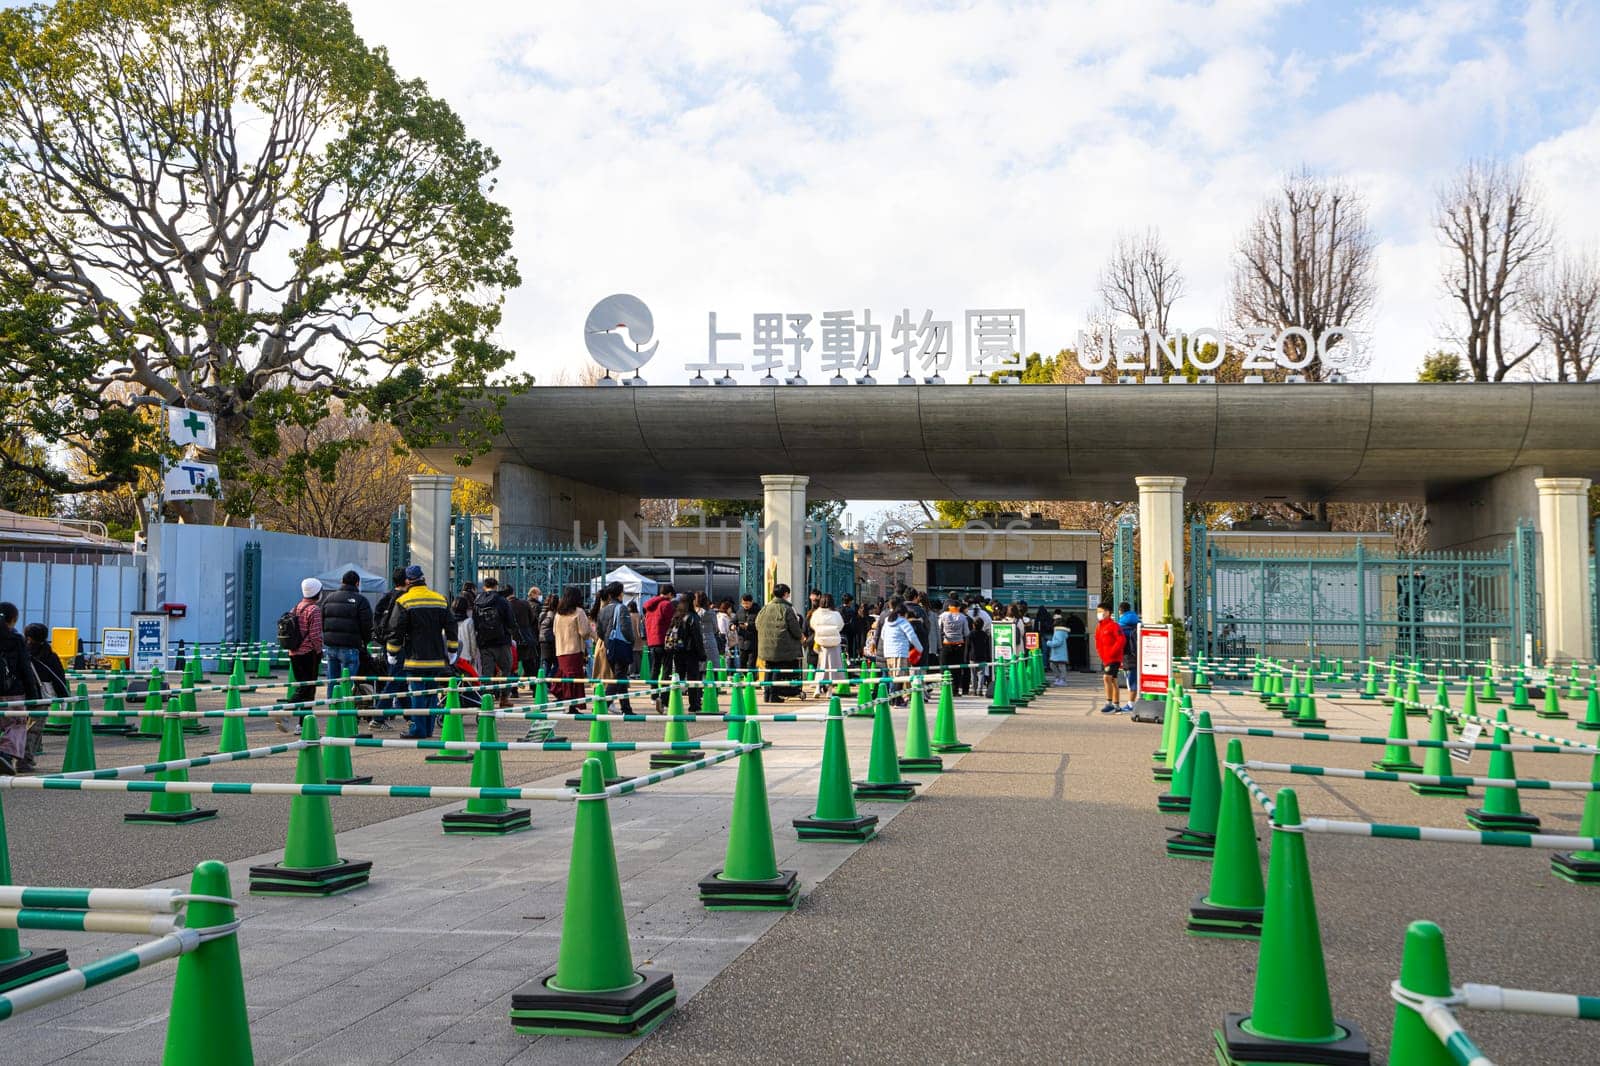 Ueno Zoo in Tokyo, Japan by sergiodv